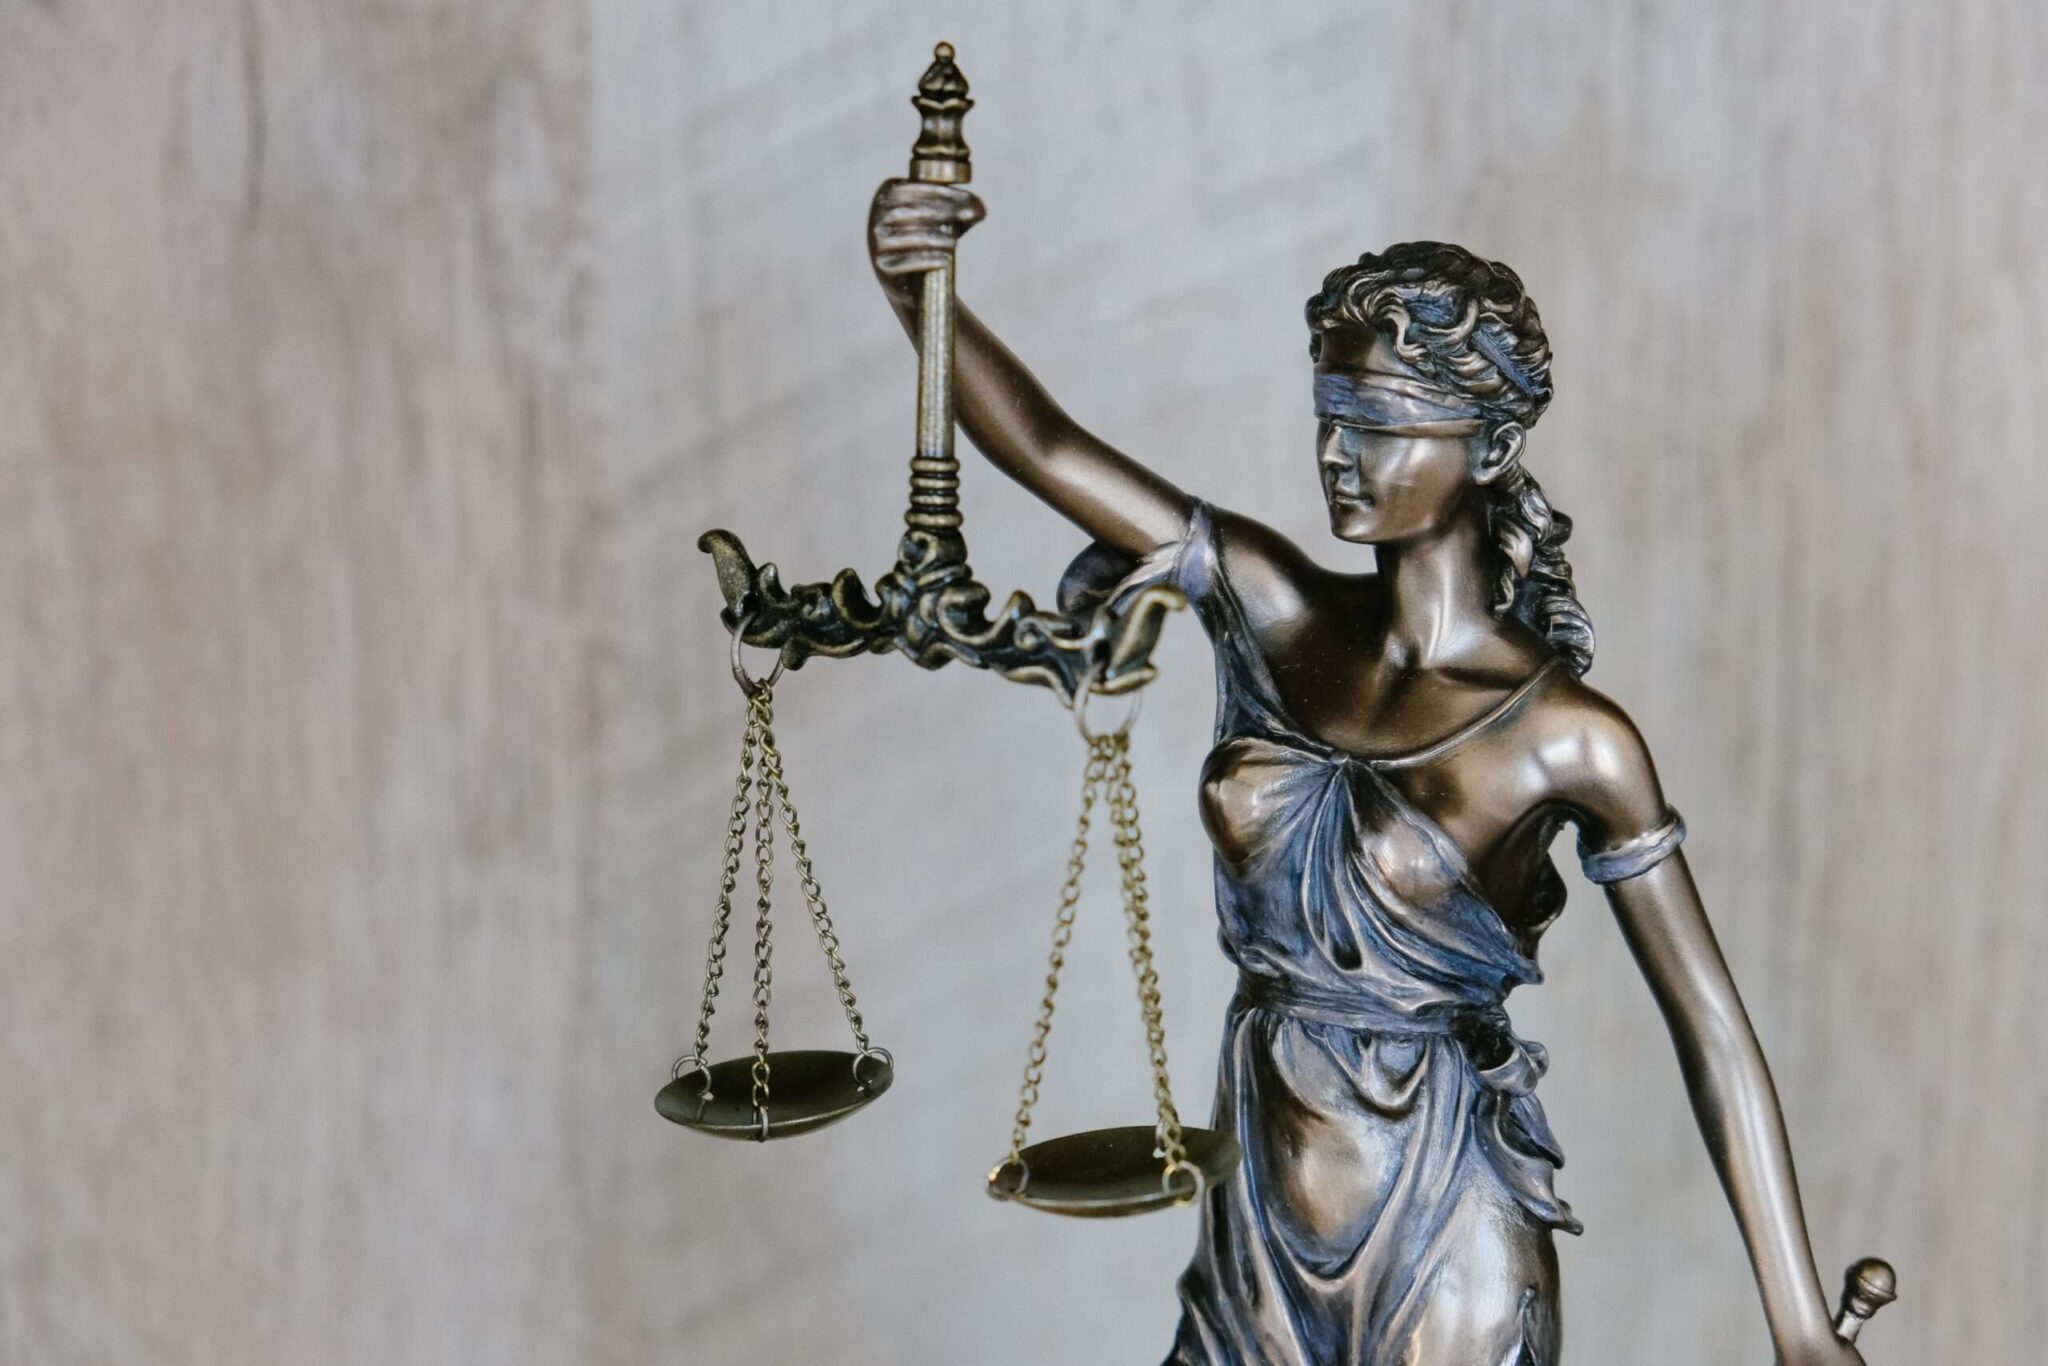 Lady justice statue to represent Bittrex court order